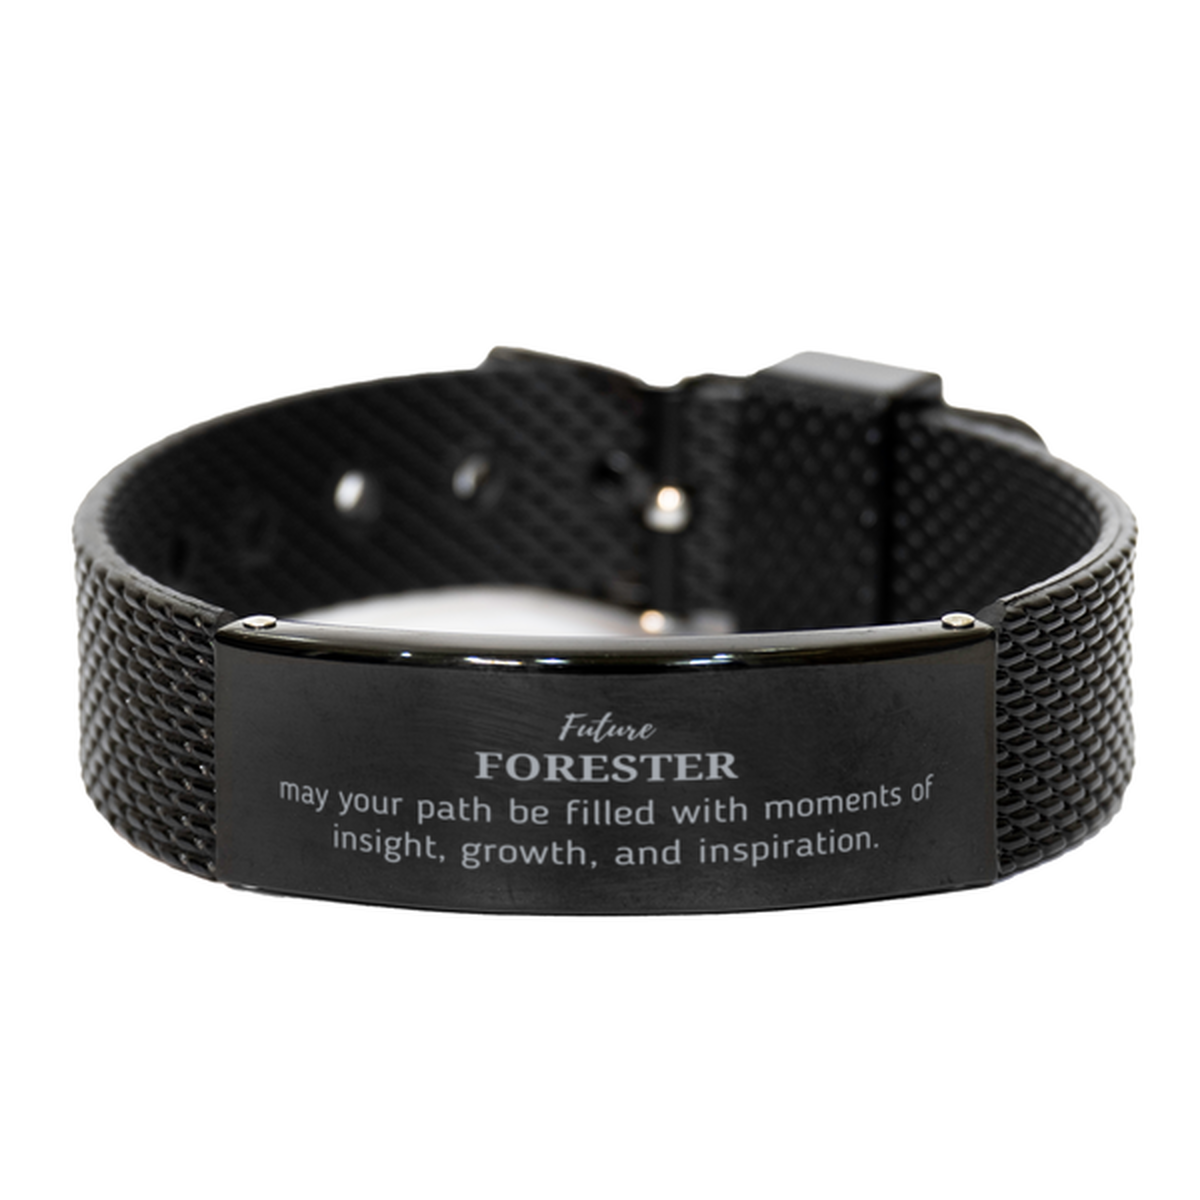 Future Forester Gifts, May your path be filled with moments of insight, Graduation Gifts for New Forester, Christmas Unique Black Shark Mesh Bracelet For Men, Women, Friends